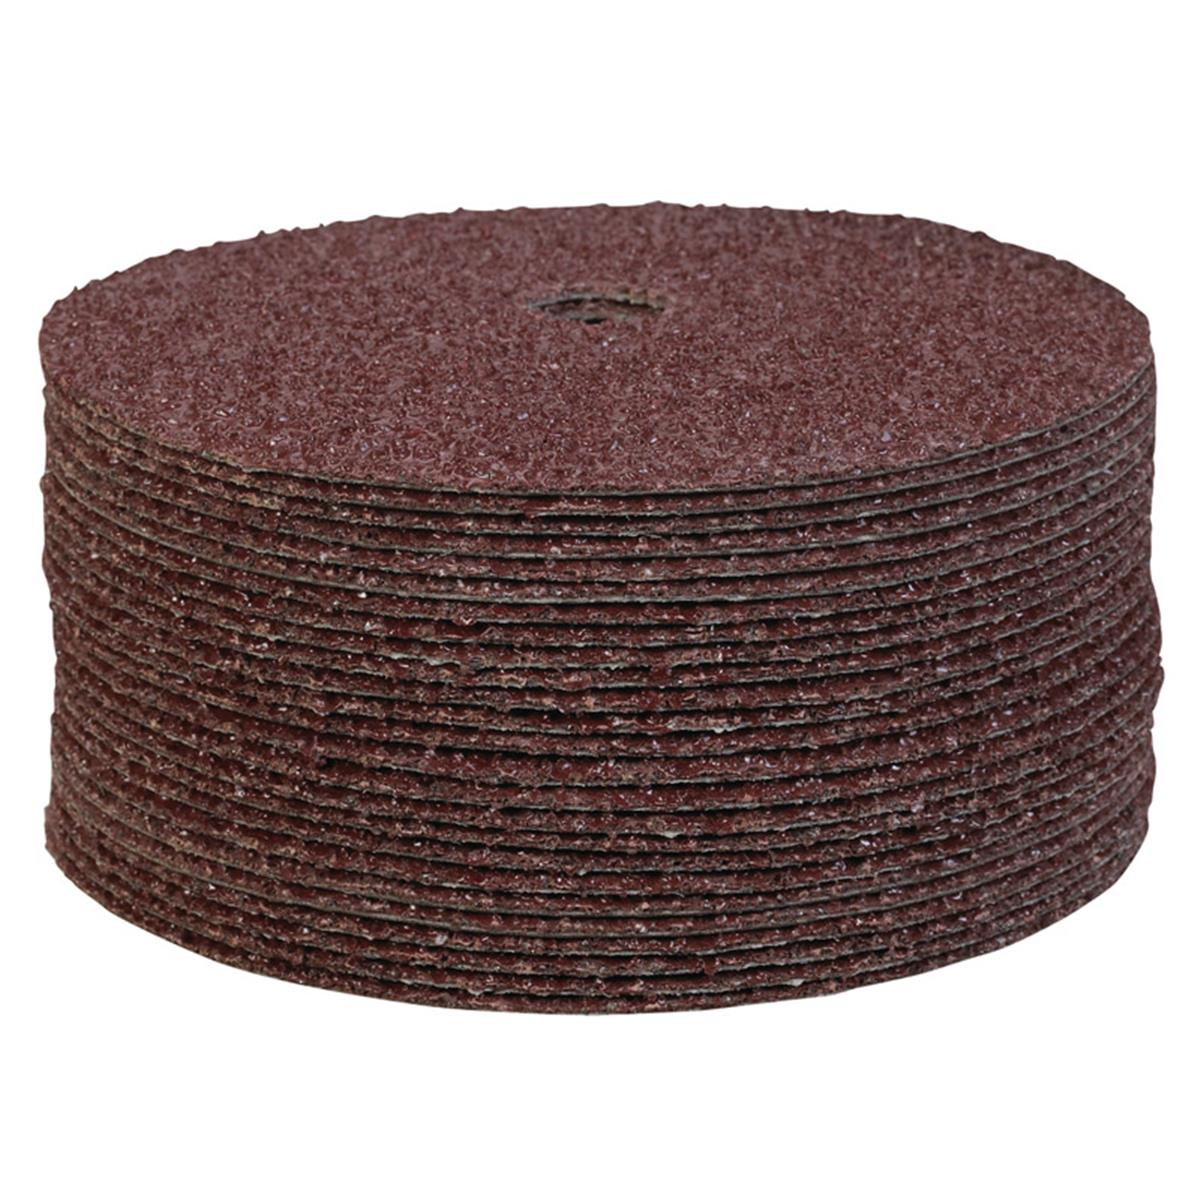 Picture of 3M 1745 7 x 0.87 in. Sand Disc  16 Grit- pack of 25